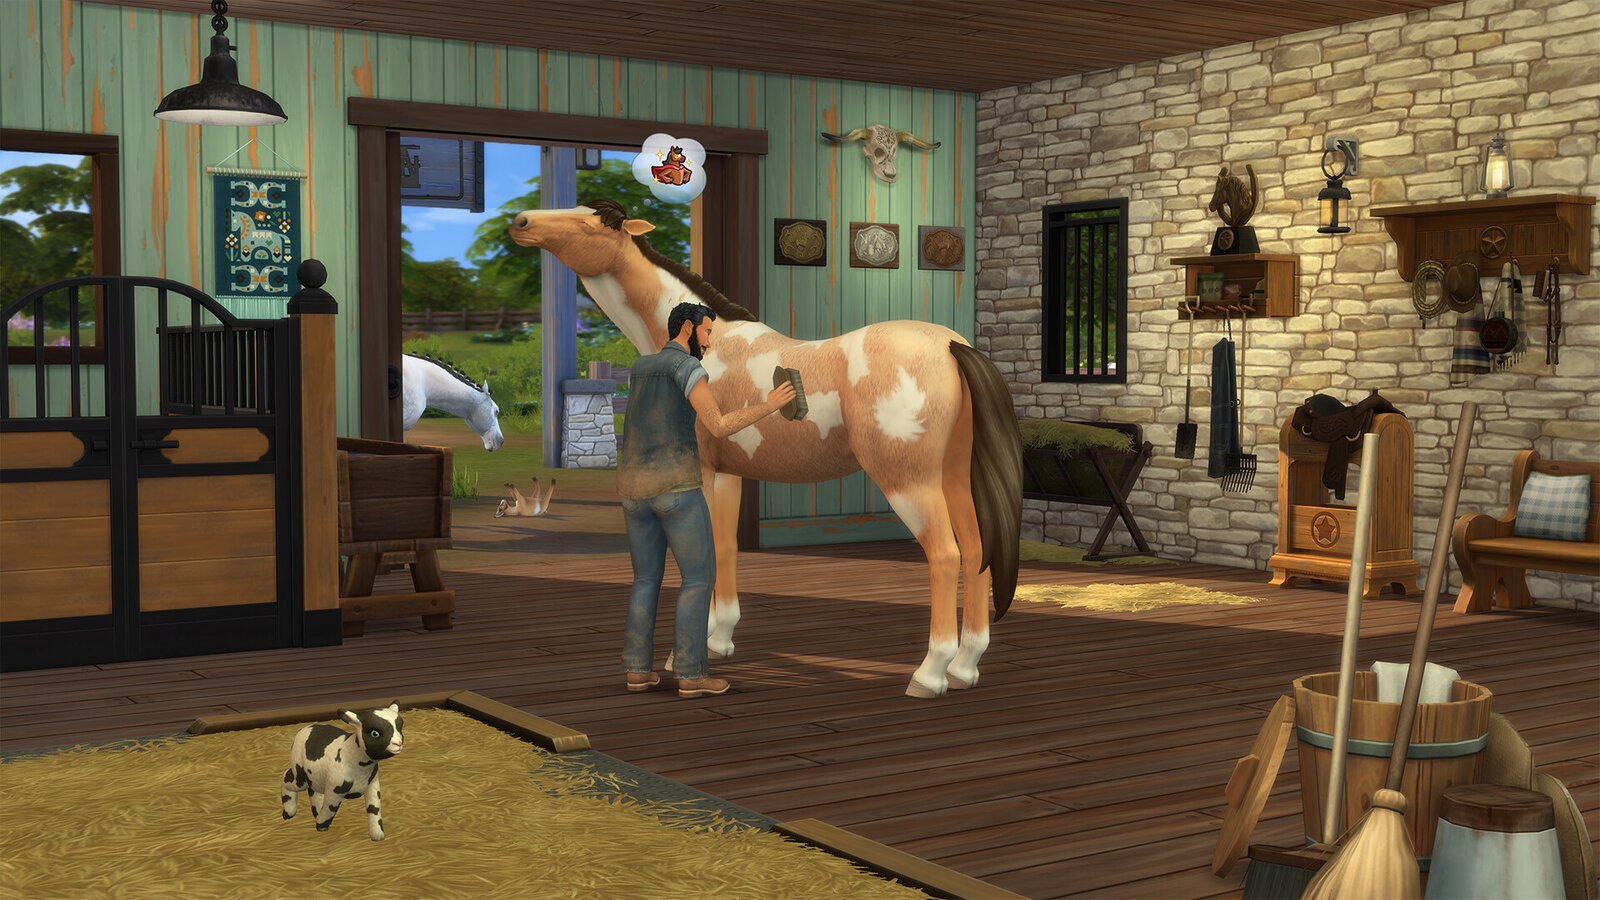 The Sims 4 - Horse Ranch